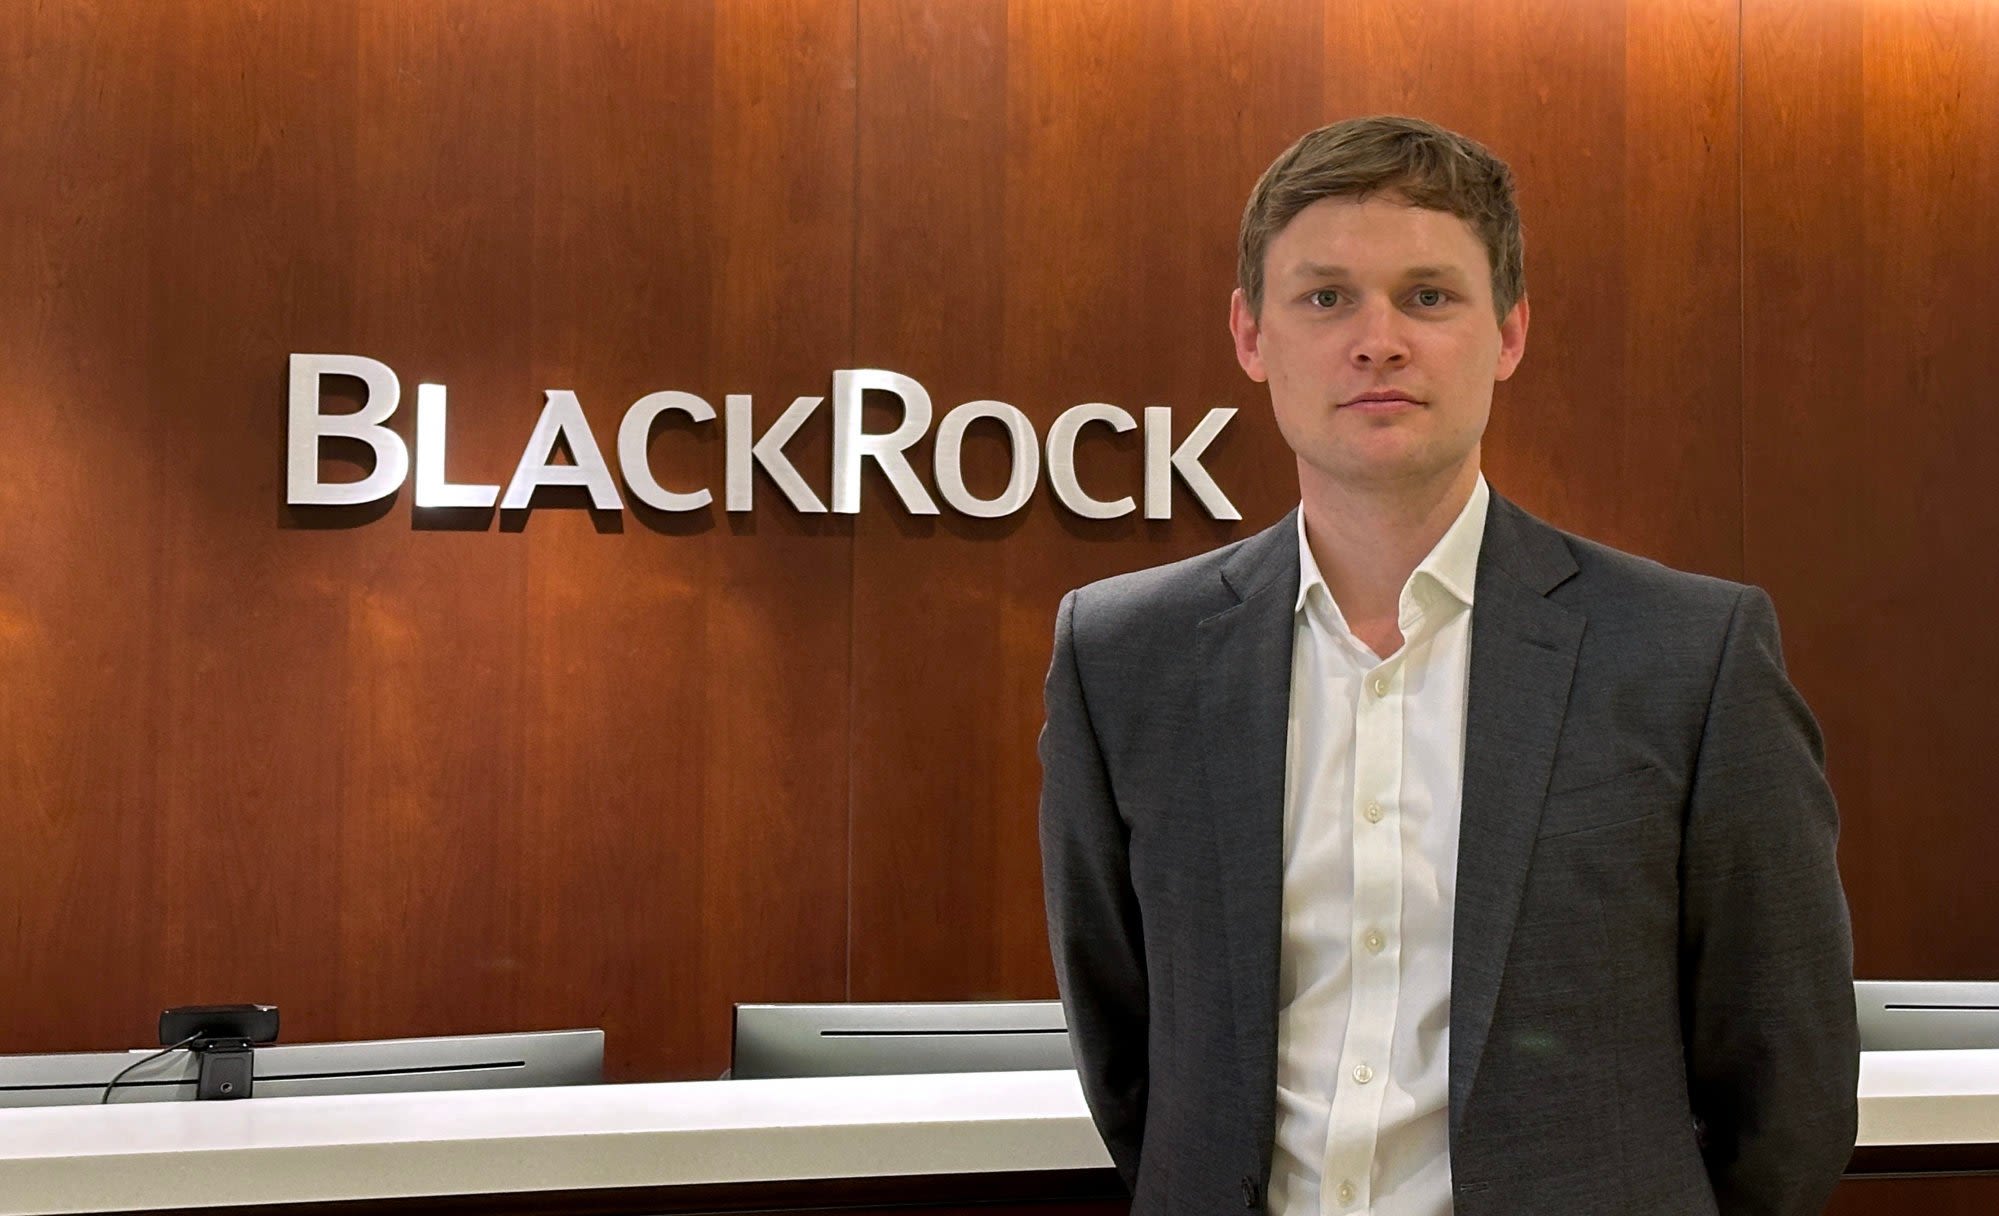 BlackRock equity fund seeks to cash in on growing risk appetite ahead of rate cuts